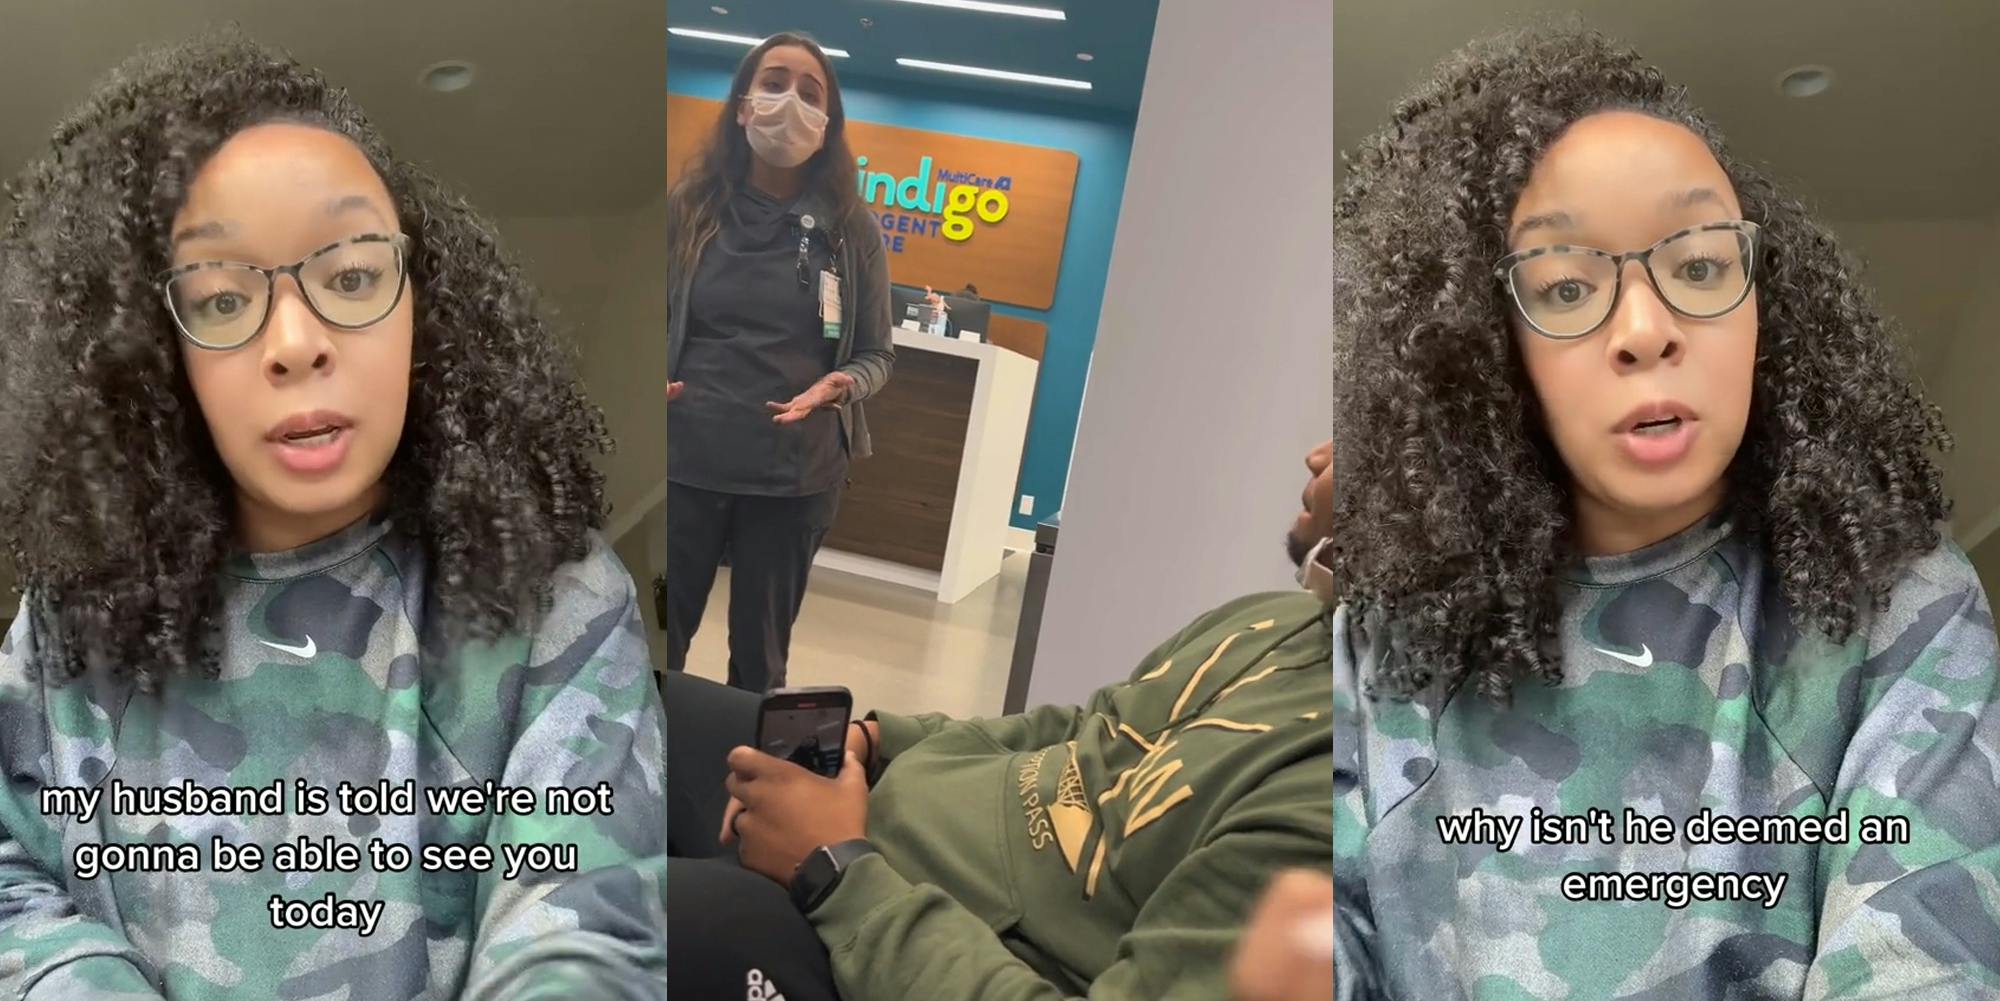 woman speaking in front of green walls with caption "my husband is told we're not gonna be able to see you today" (l) nurse speaking to family at urgent care (c) woman speaking in front of green walls with caption "why isn't he deemed an emergency" (r)